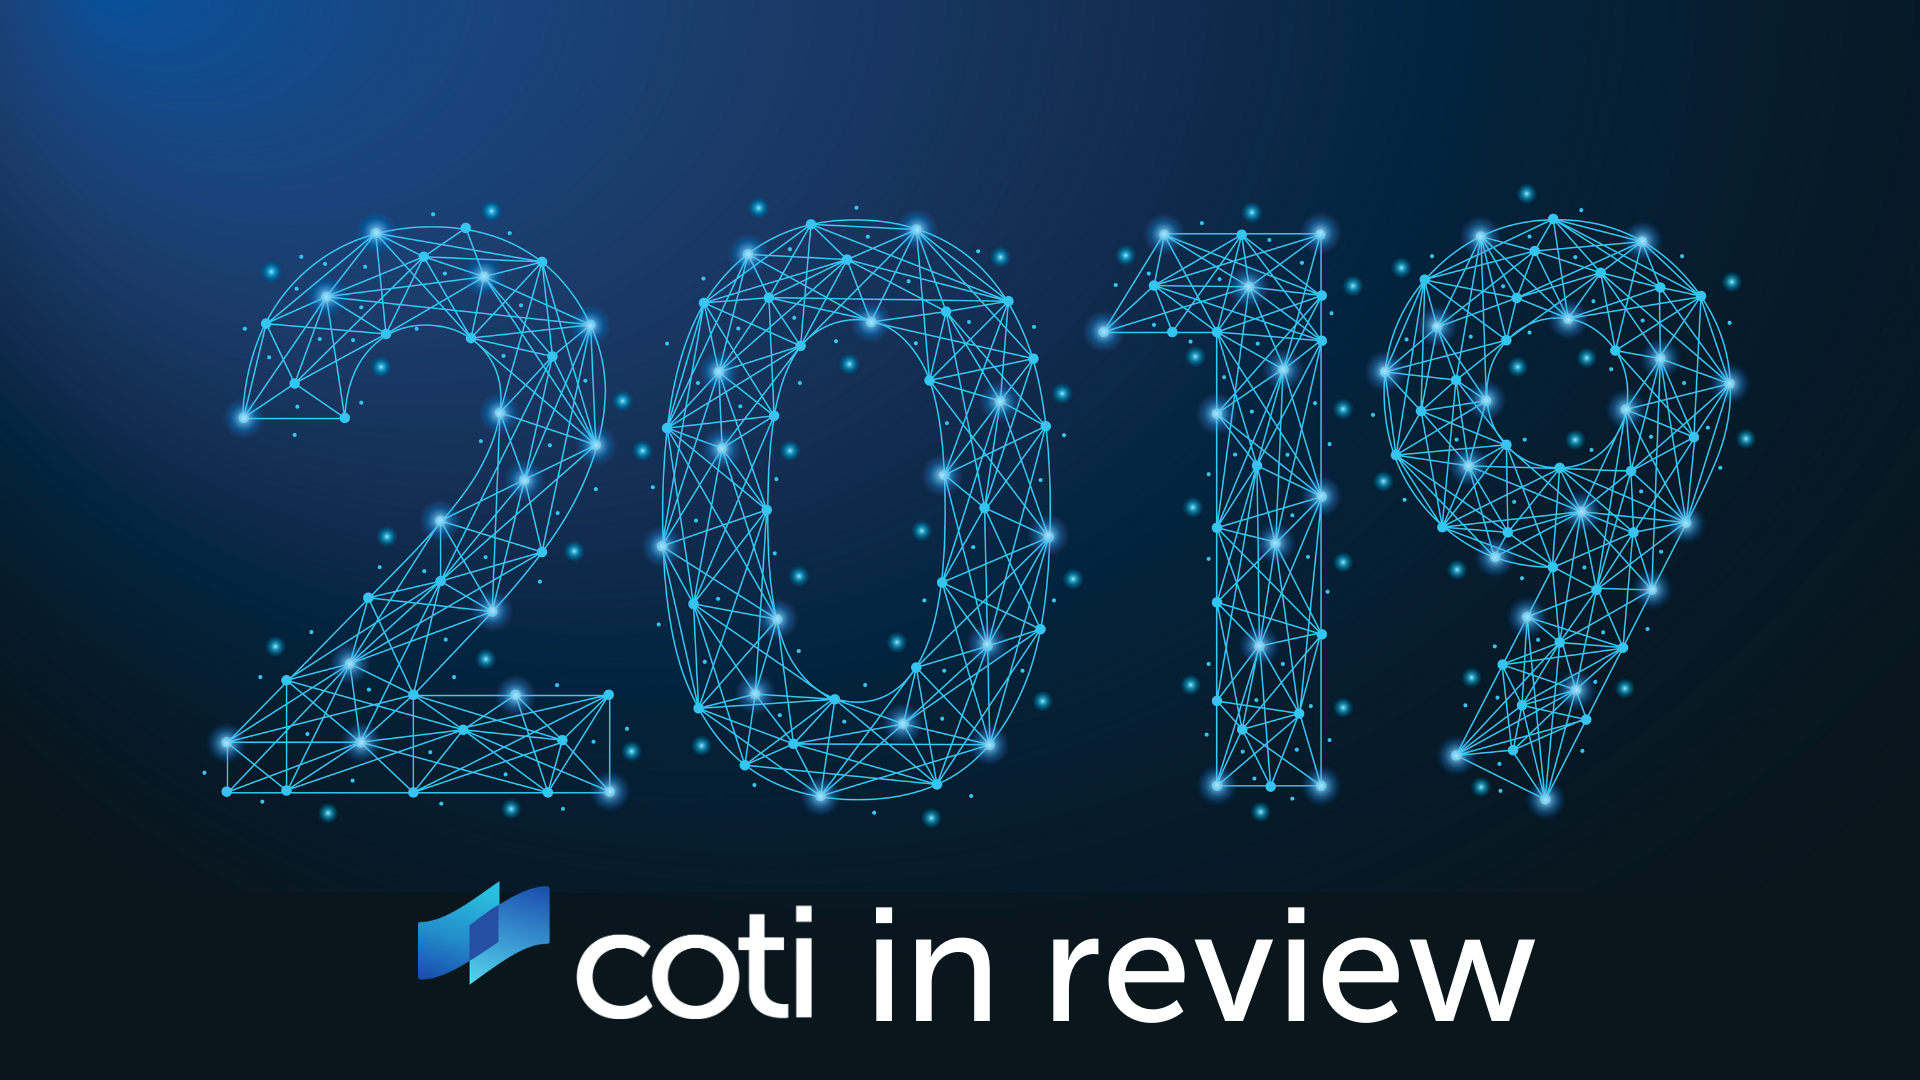 COTI 2019 in review. We would like to start this year’s ...